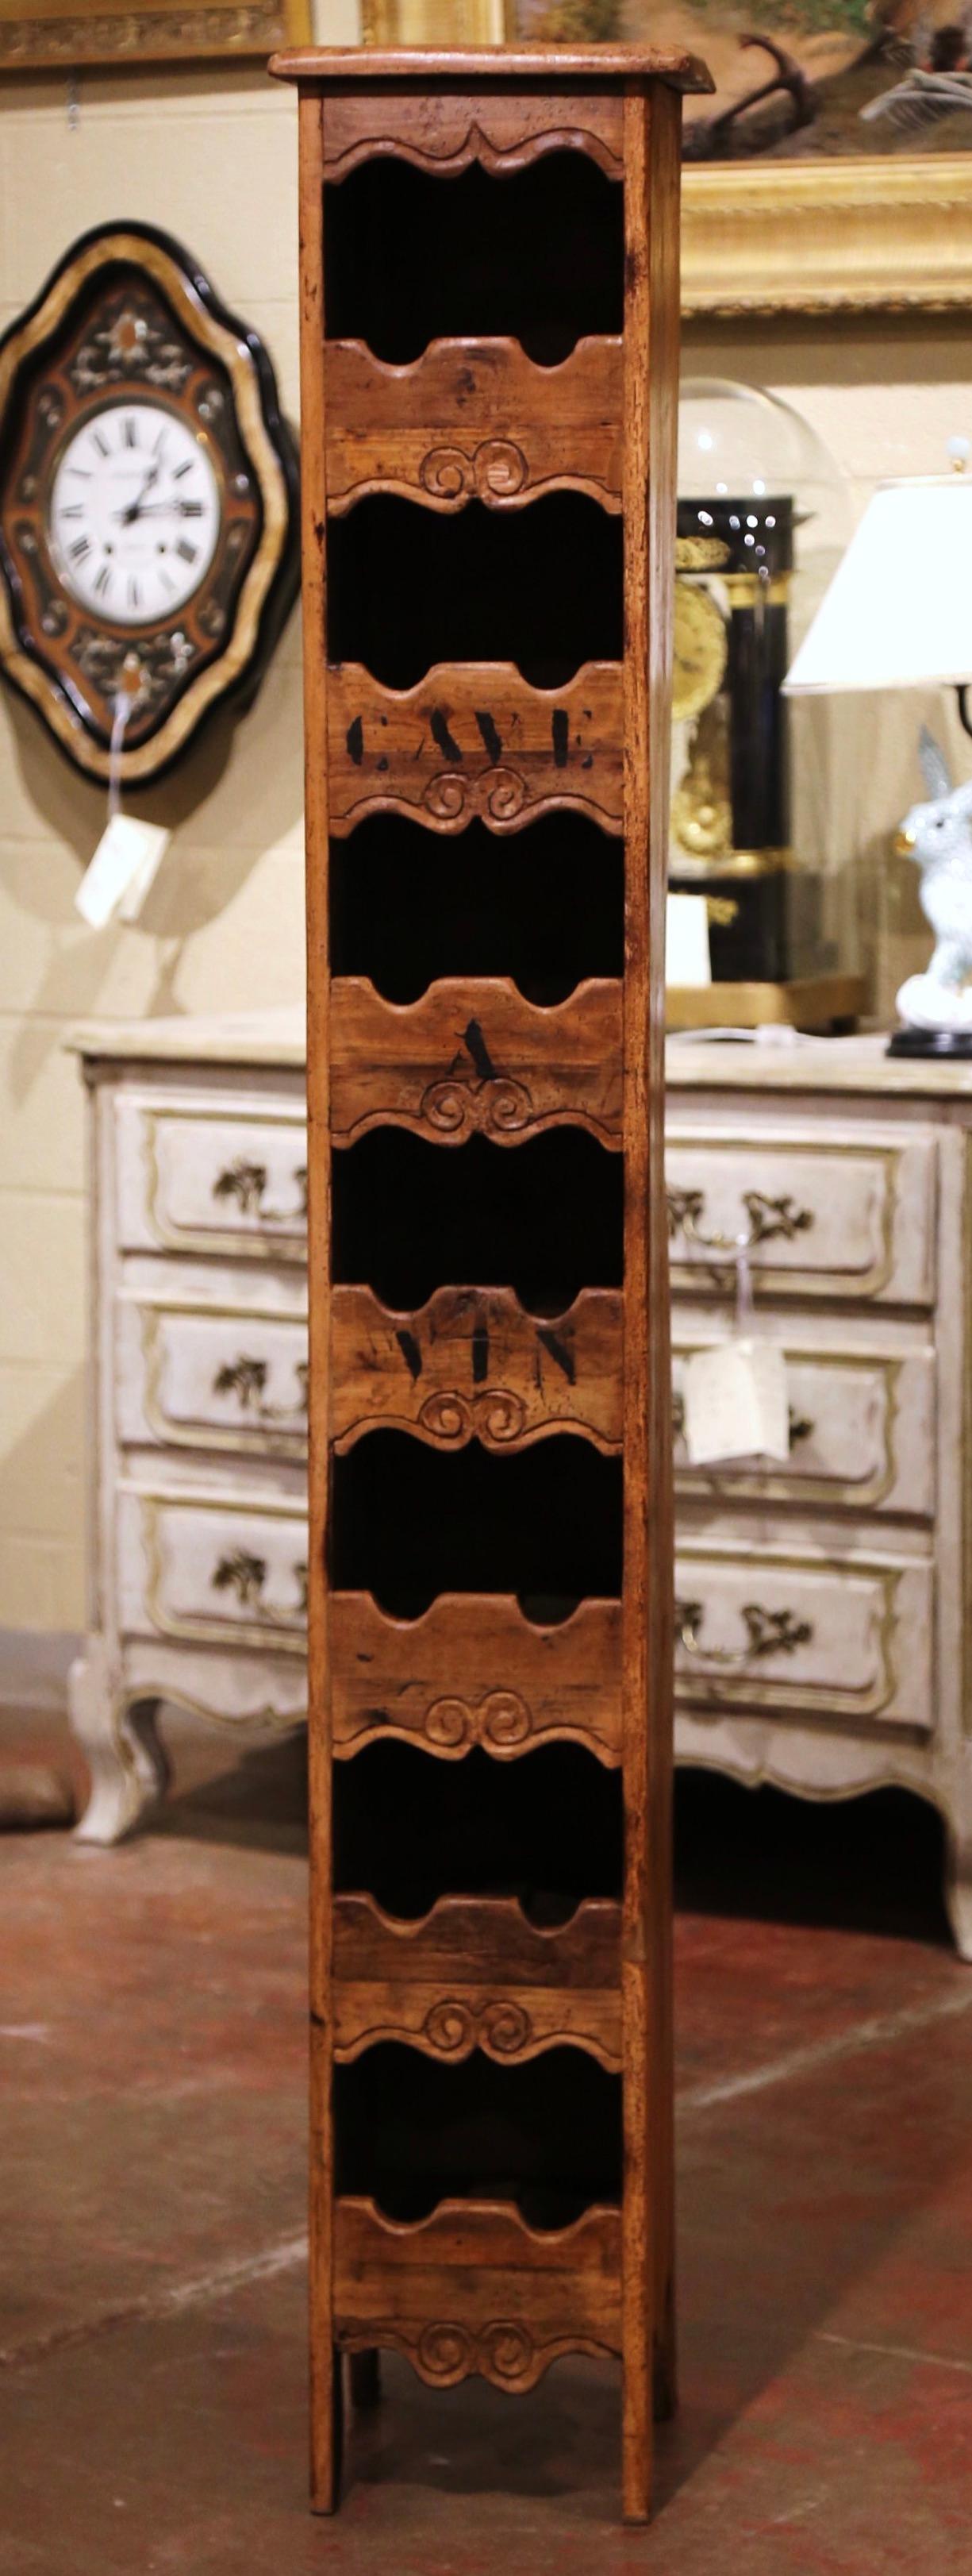 This narrow, antique wine cabinet was crafted in western France using old timber. The tall, thin, simple pine cabinet sits on small scroll feet under a scalloped apron. The display piece with the words “Cave a Vin” printed on the front (which